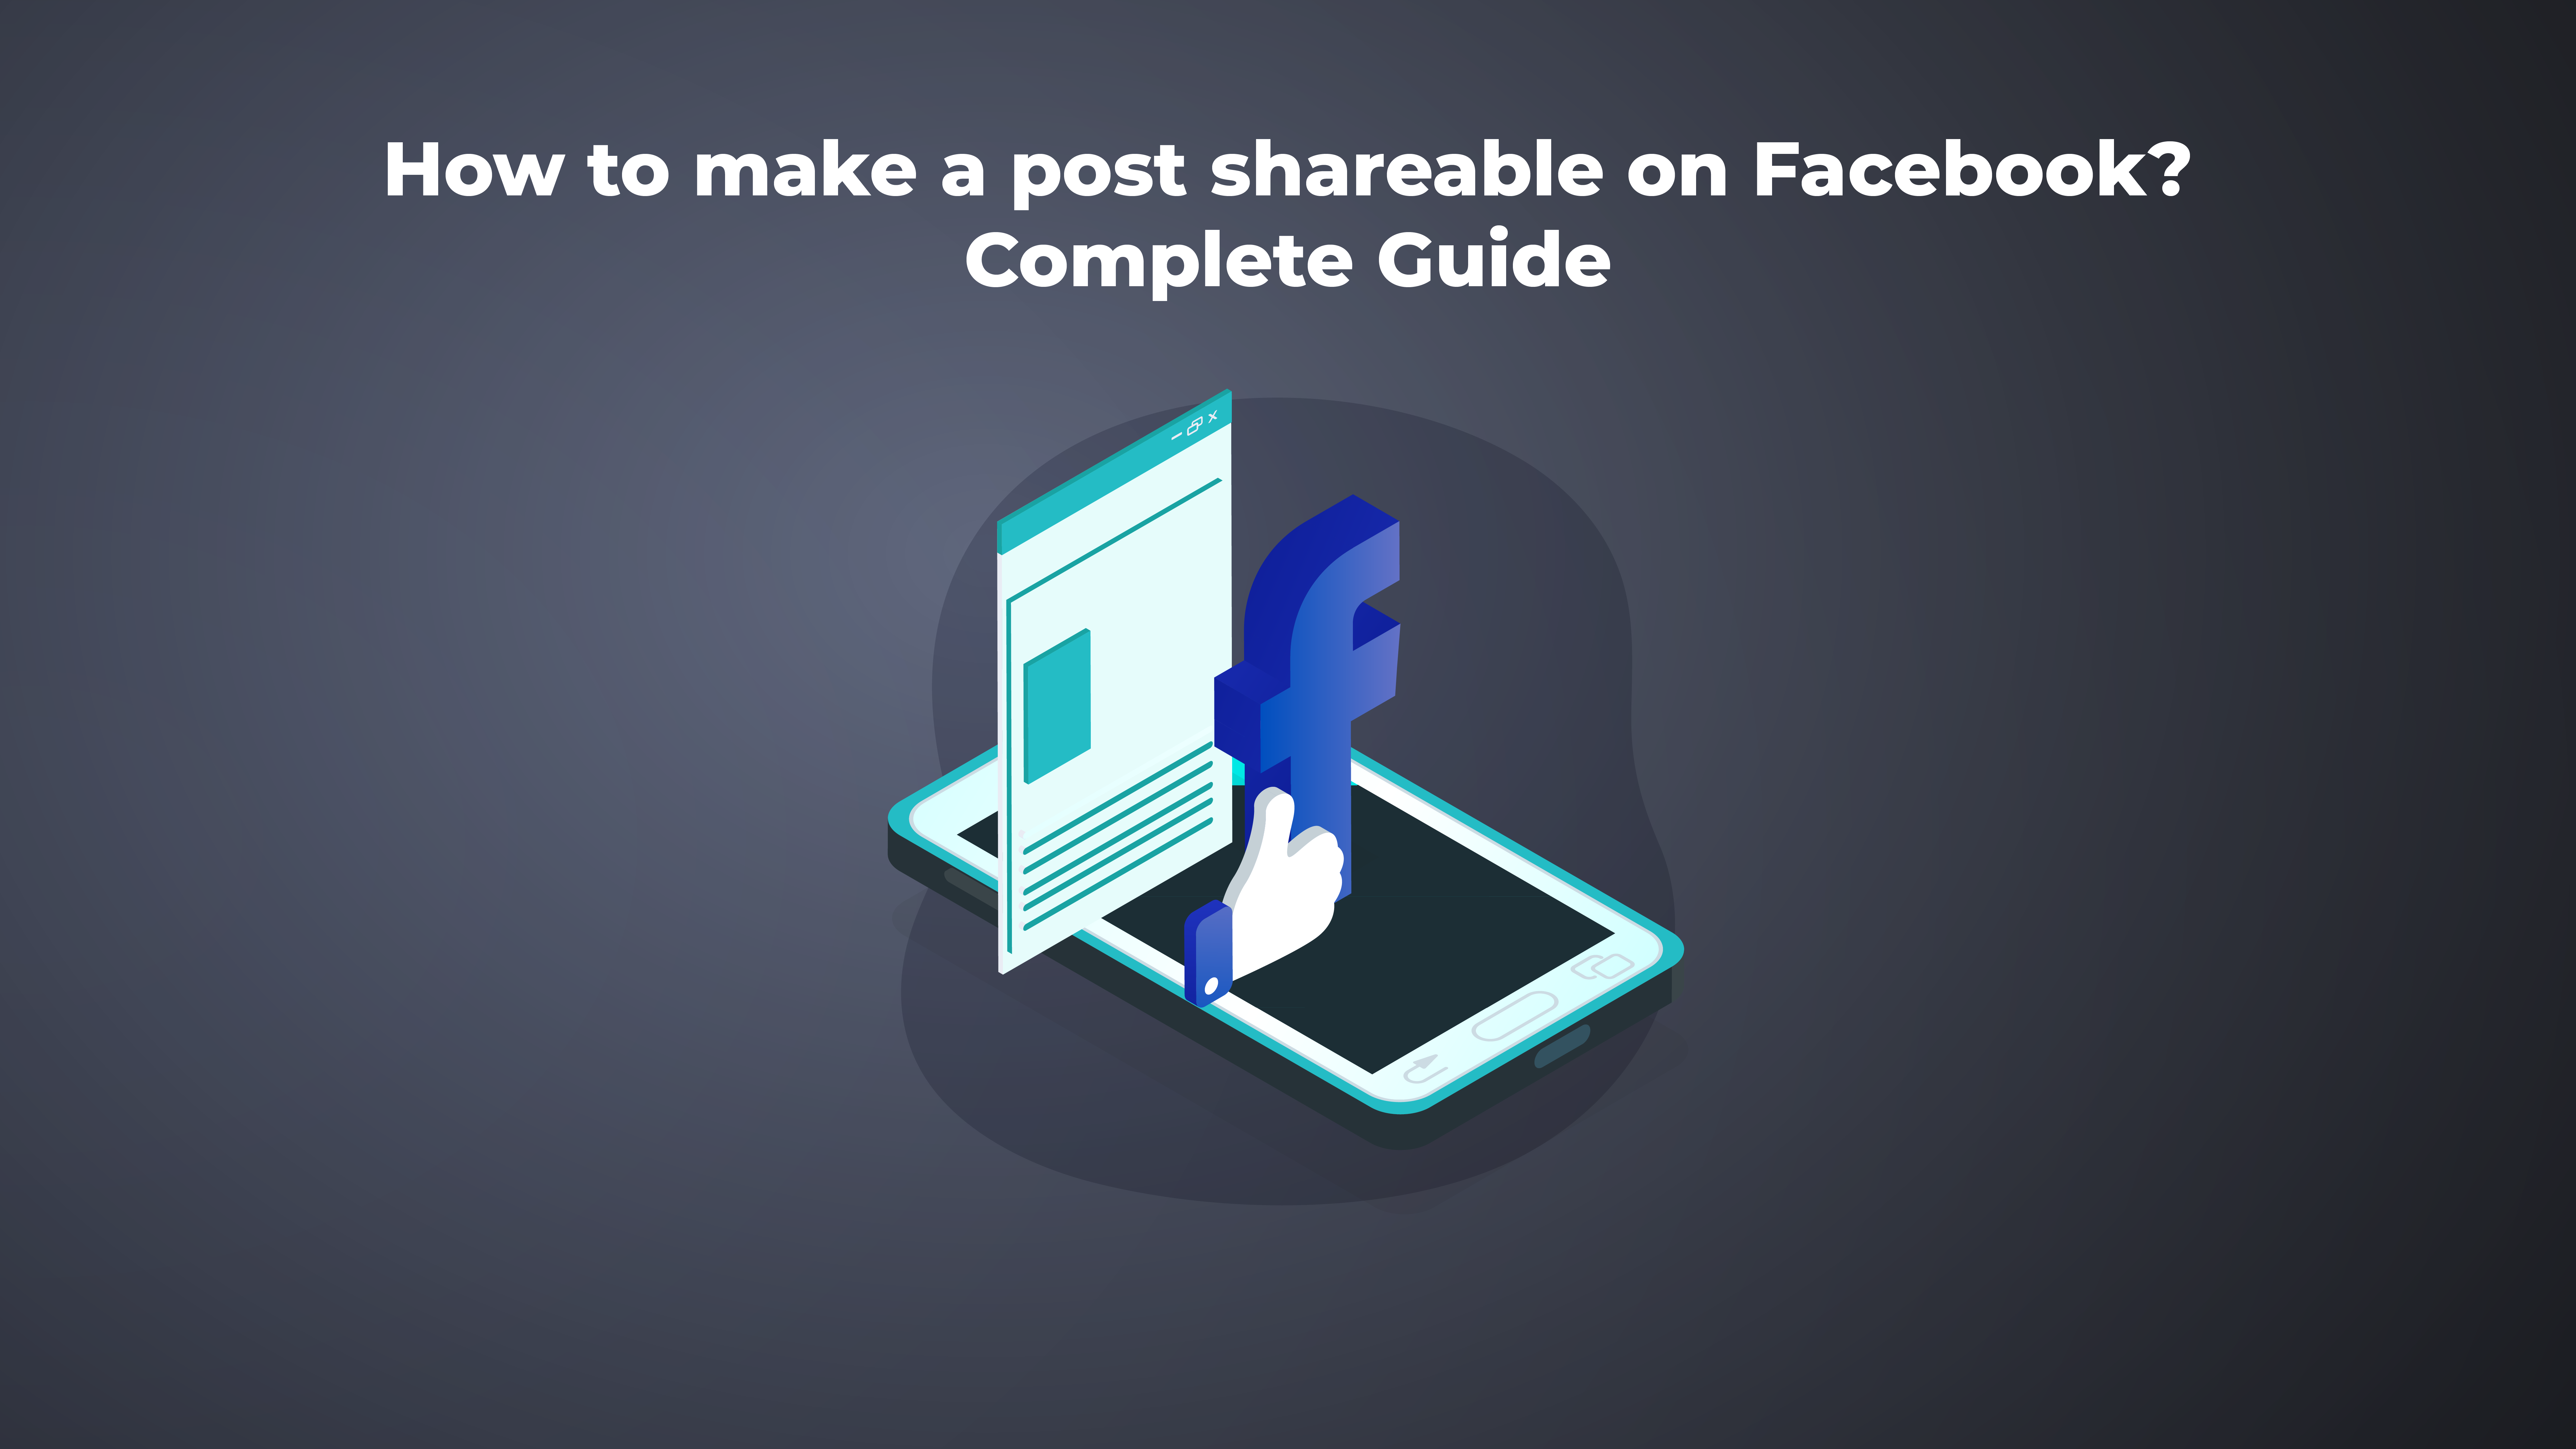 18-how to make a post shareable on facebook - Complete Guide-18